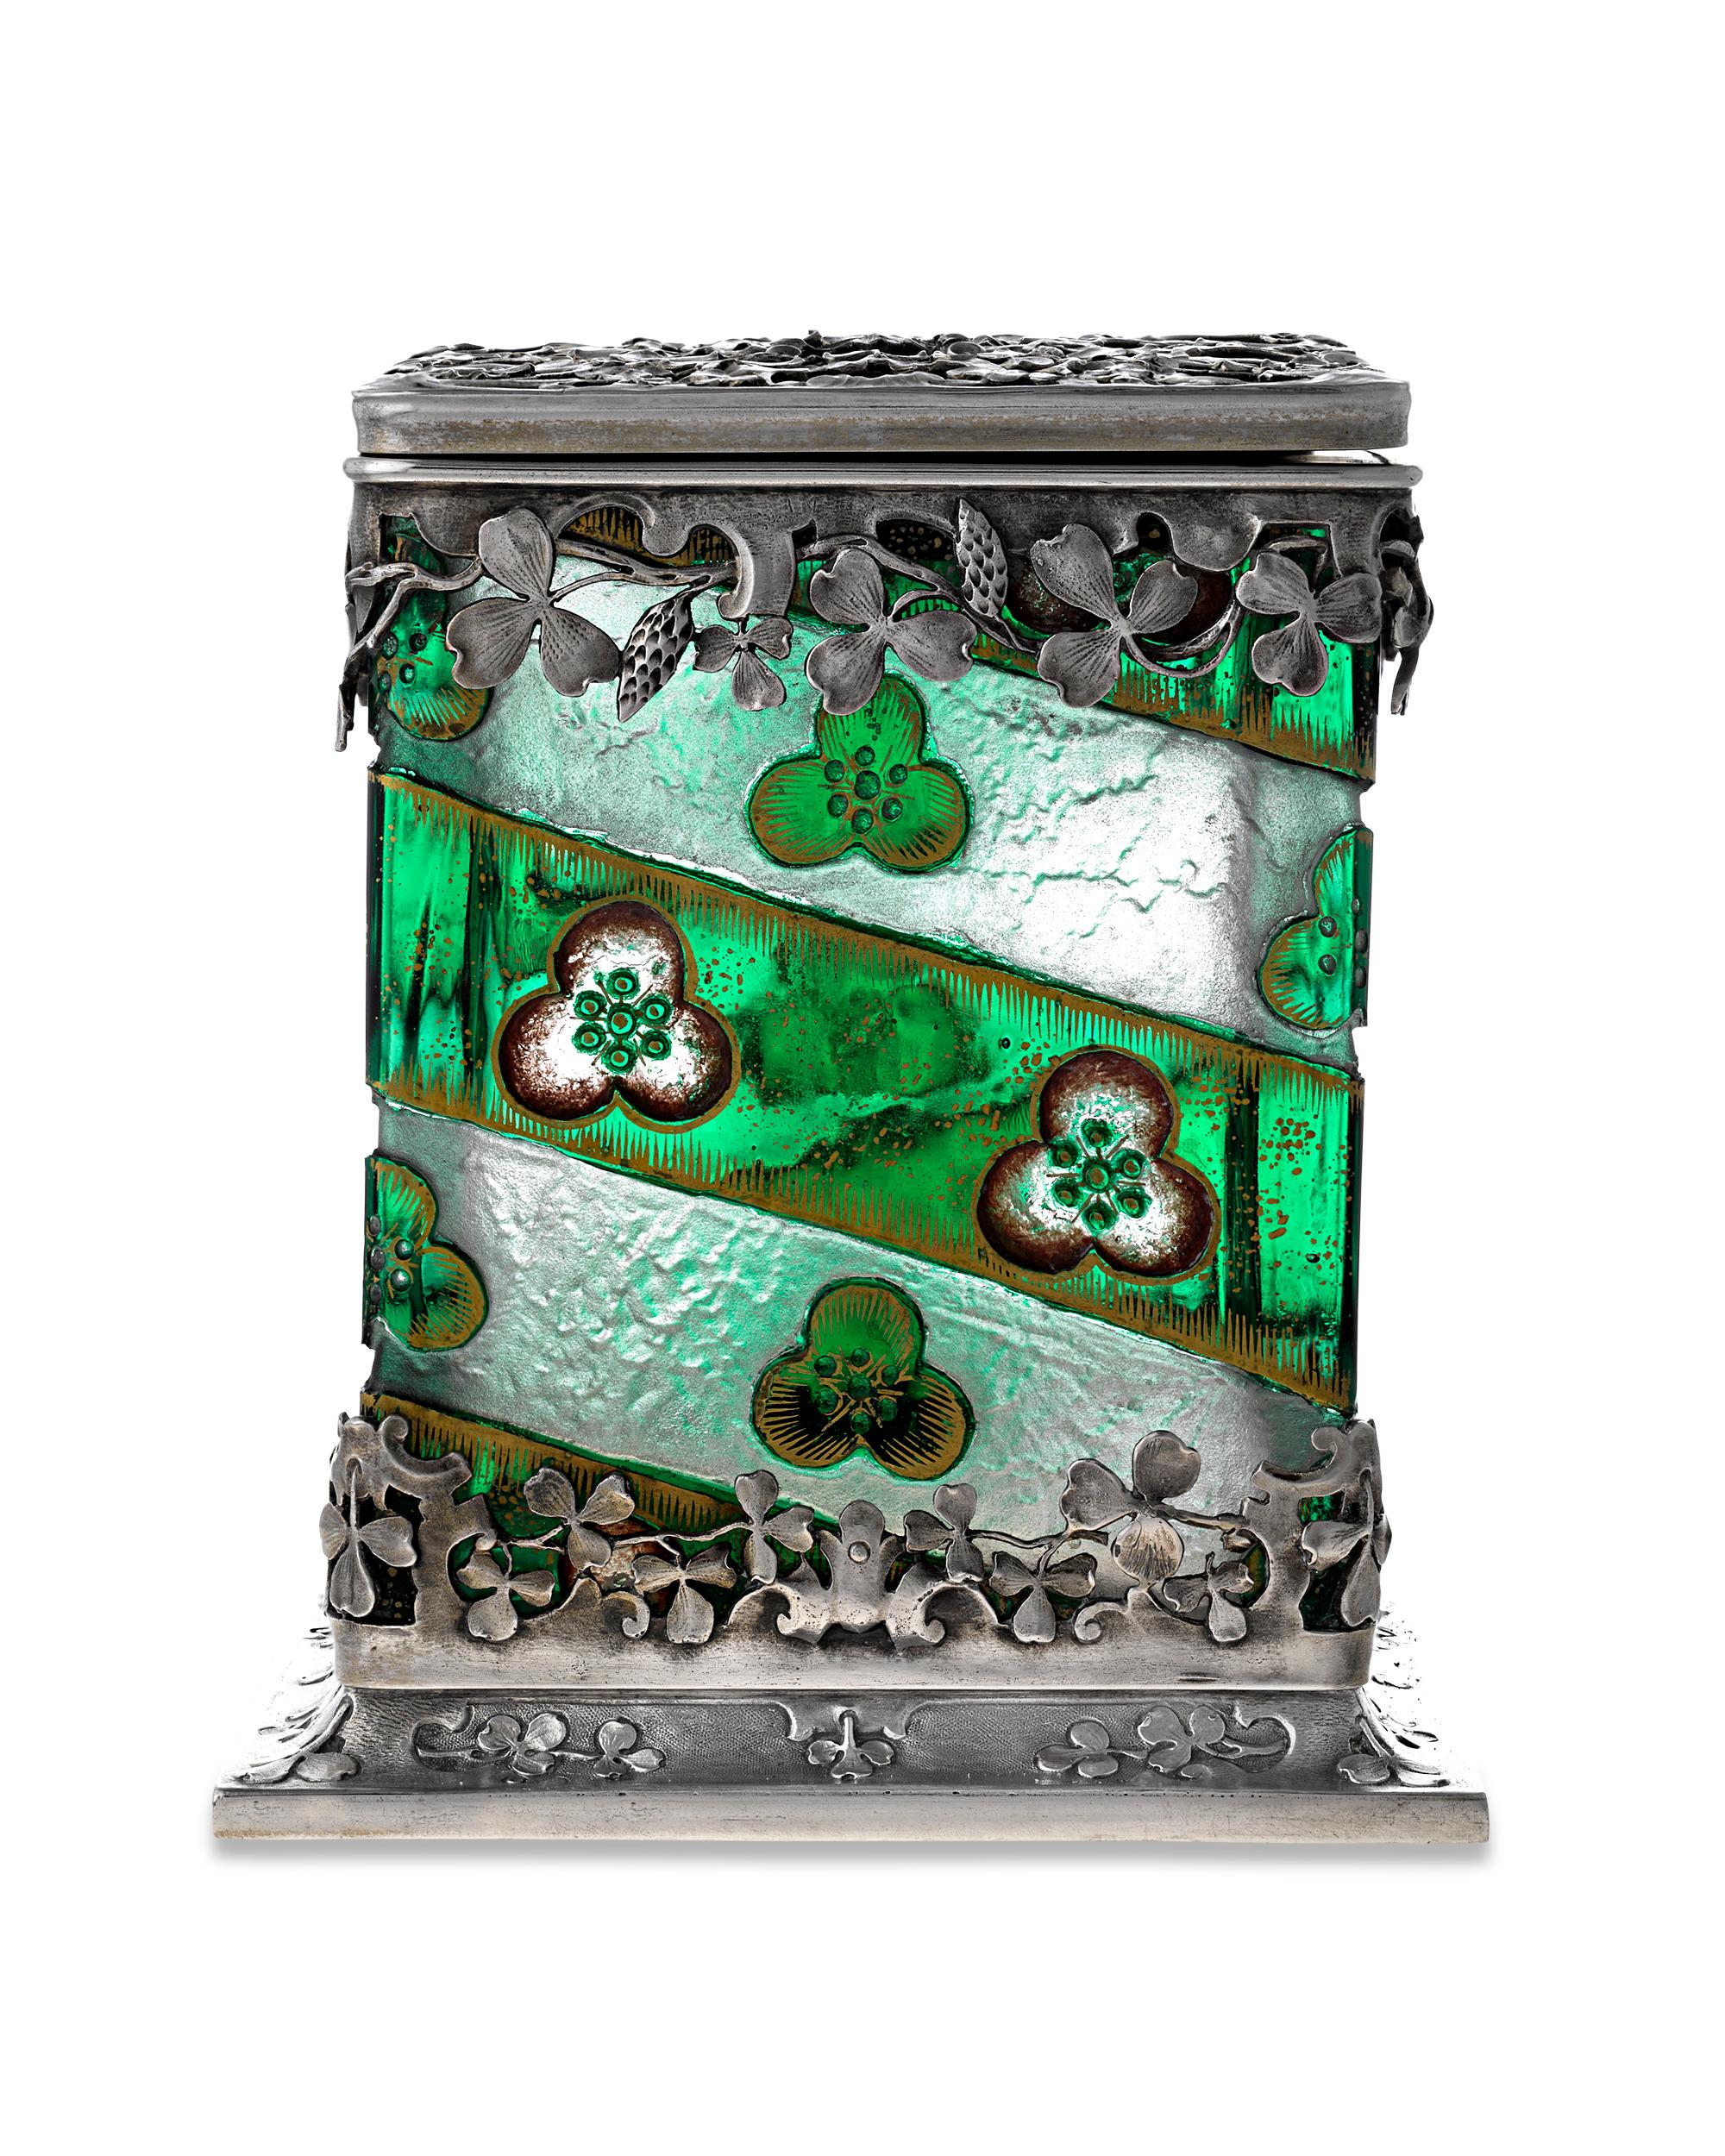 This enchanting green glass and silver casket from renowned French art glass company Daum evokes the verdant lushness of a summer garden. Finely detailed silver clovers and vines encircle rich green glass in this luminescent and highly unique